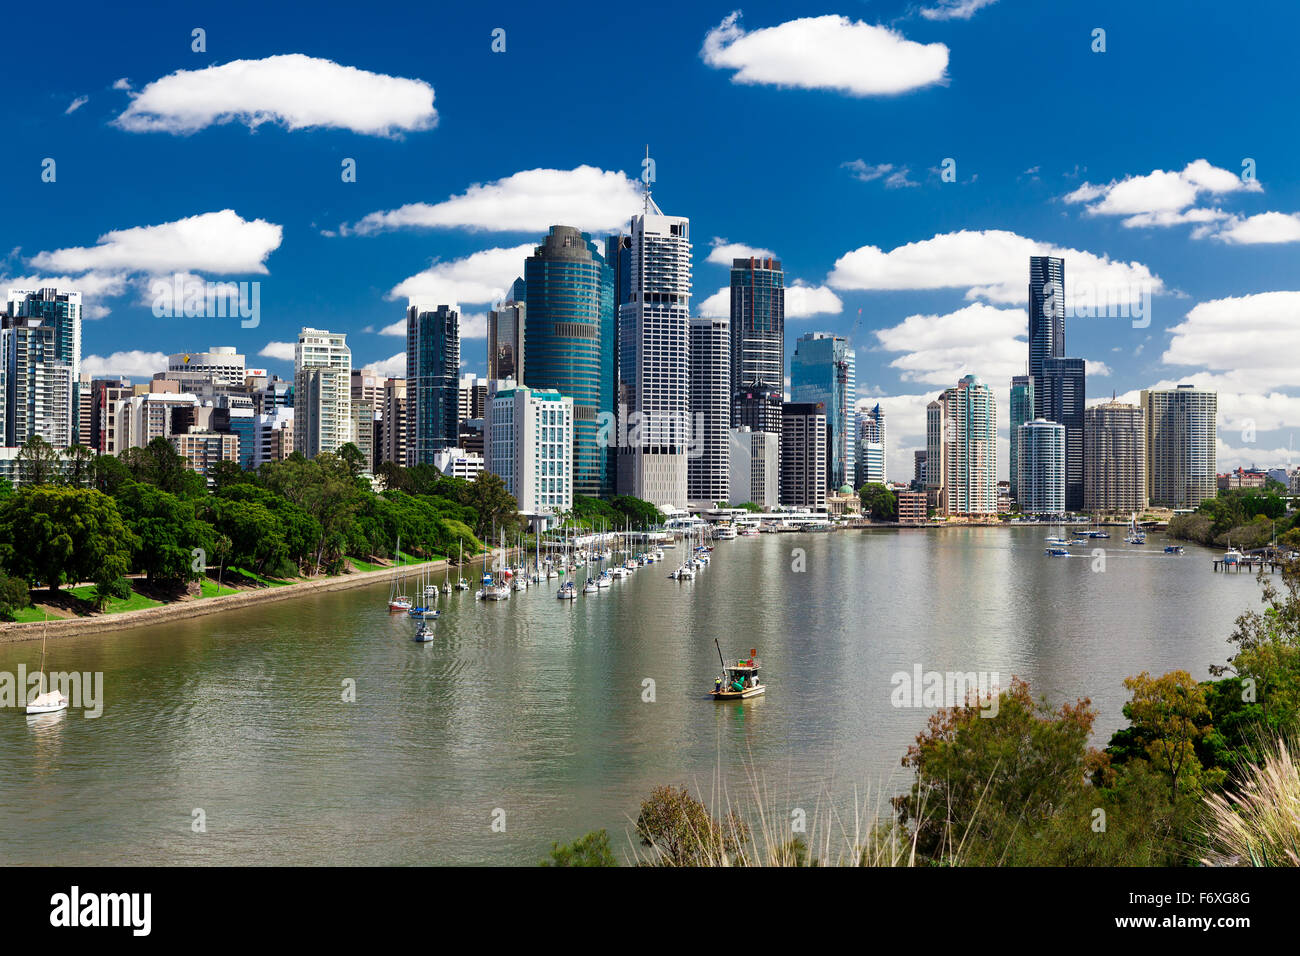 Brisbane, AUS - 18 NOV 2015: View from Kangaroo point overlooking Brisbane City and river during a sunny day. Stock Photo